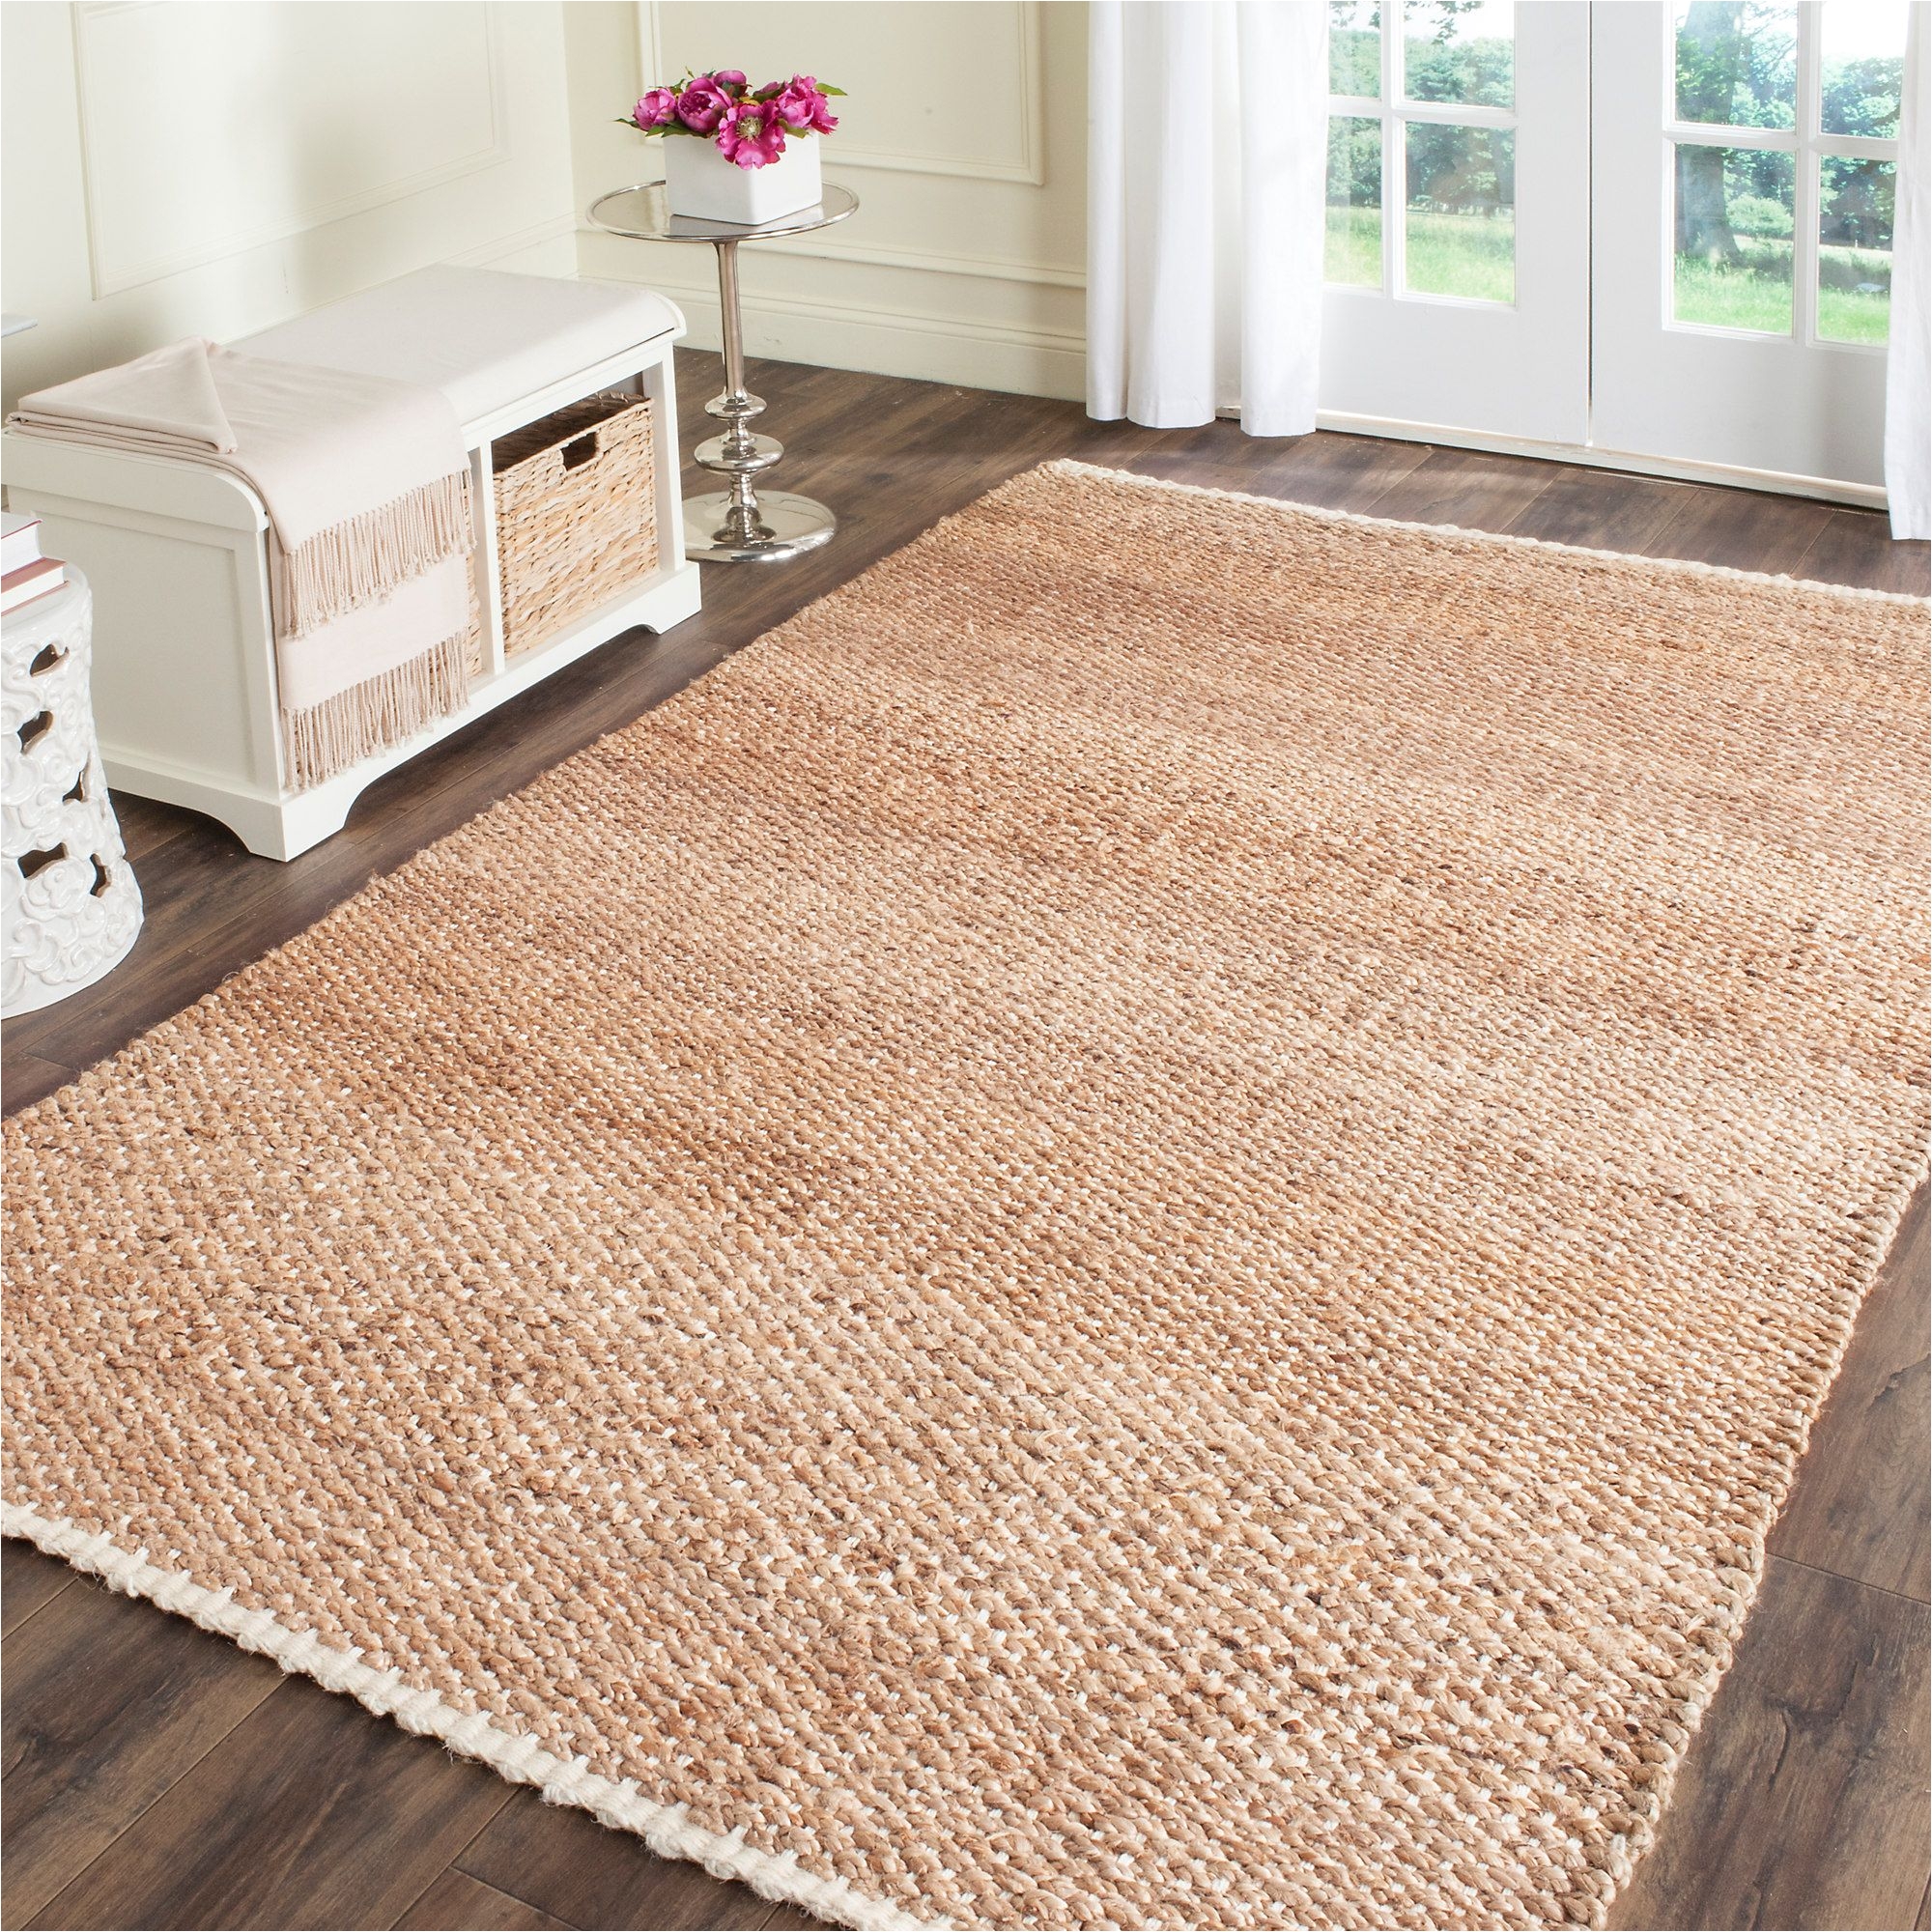 handwoven of sustainably harvested sisal this rug grounds any space with hearty natural texture and